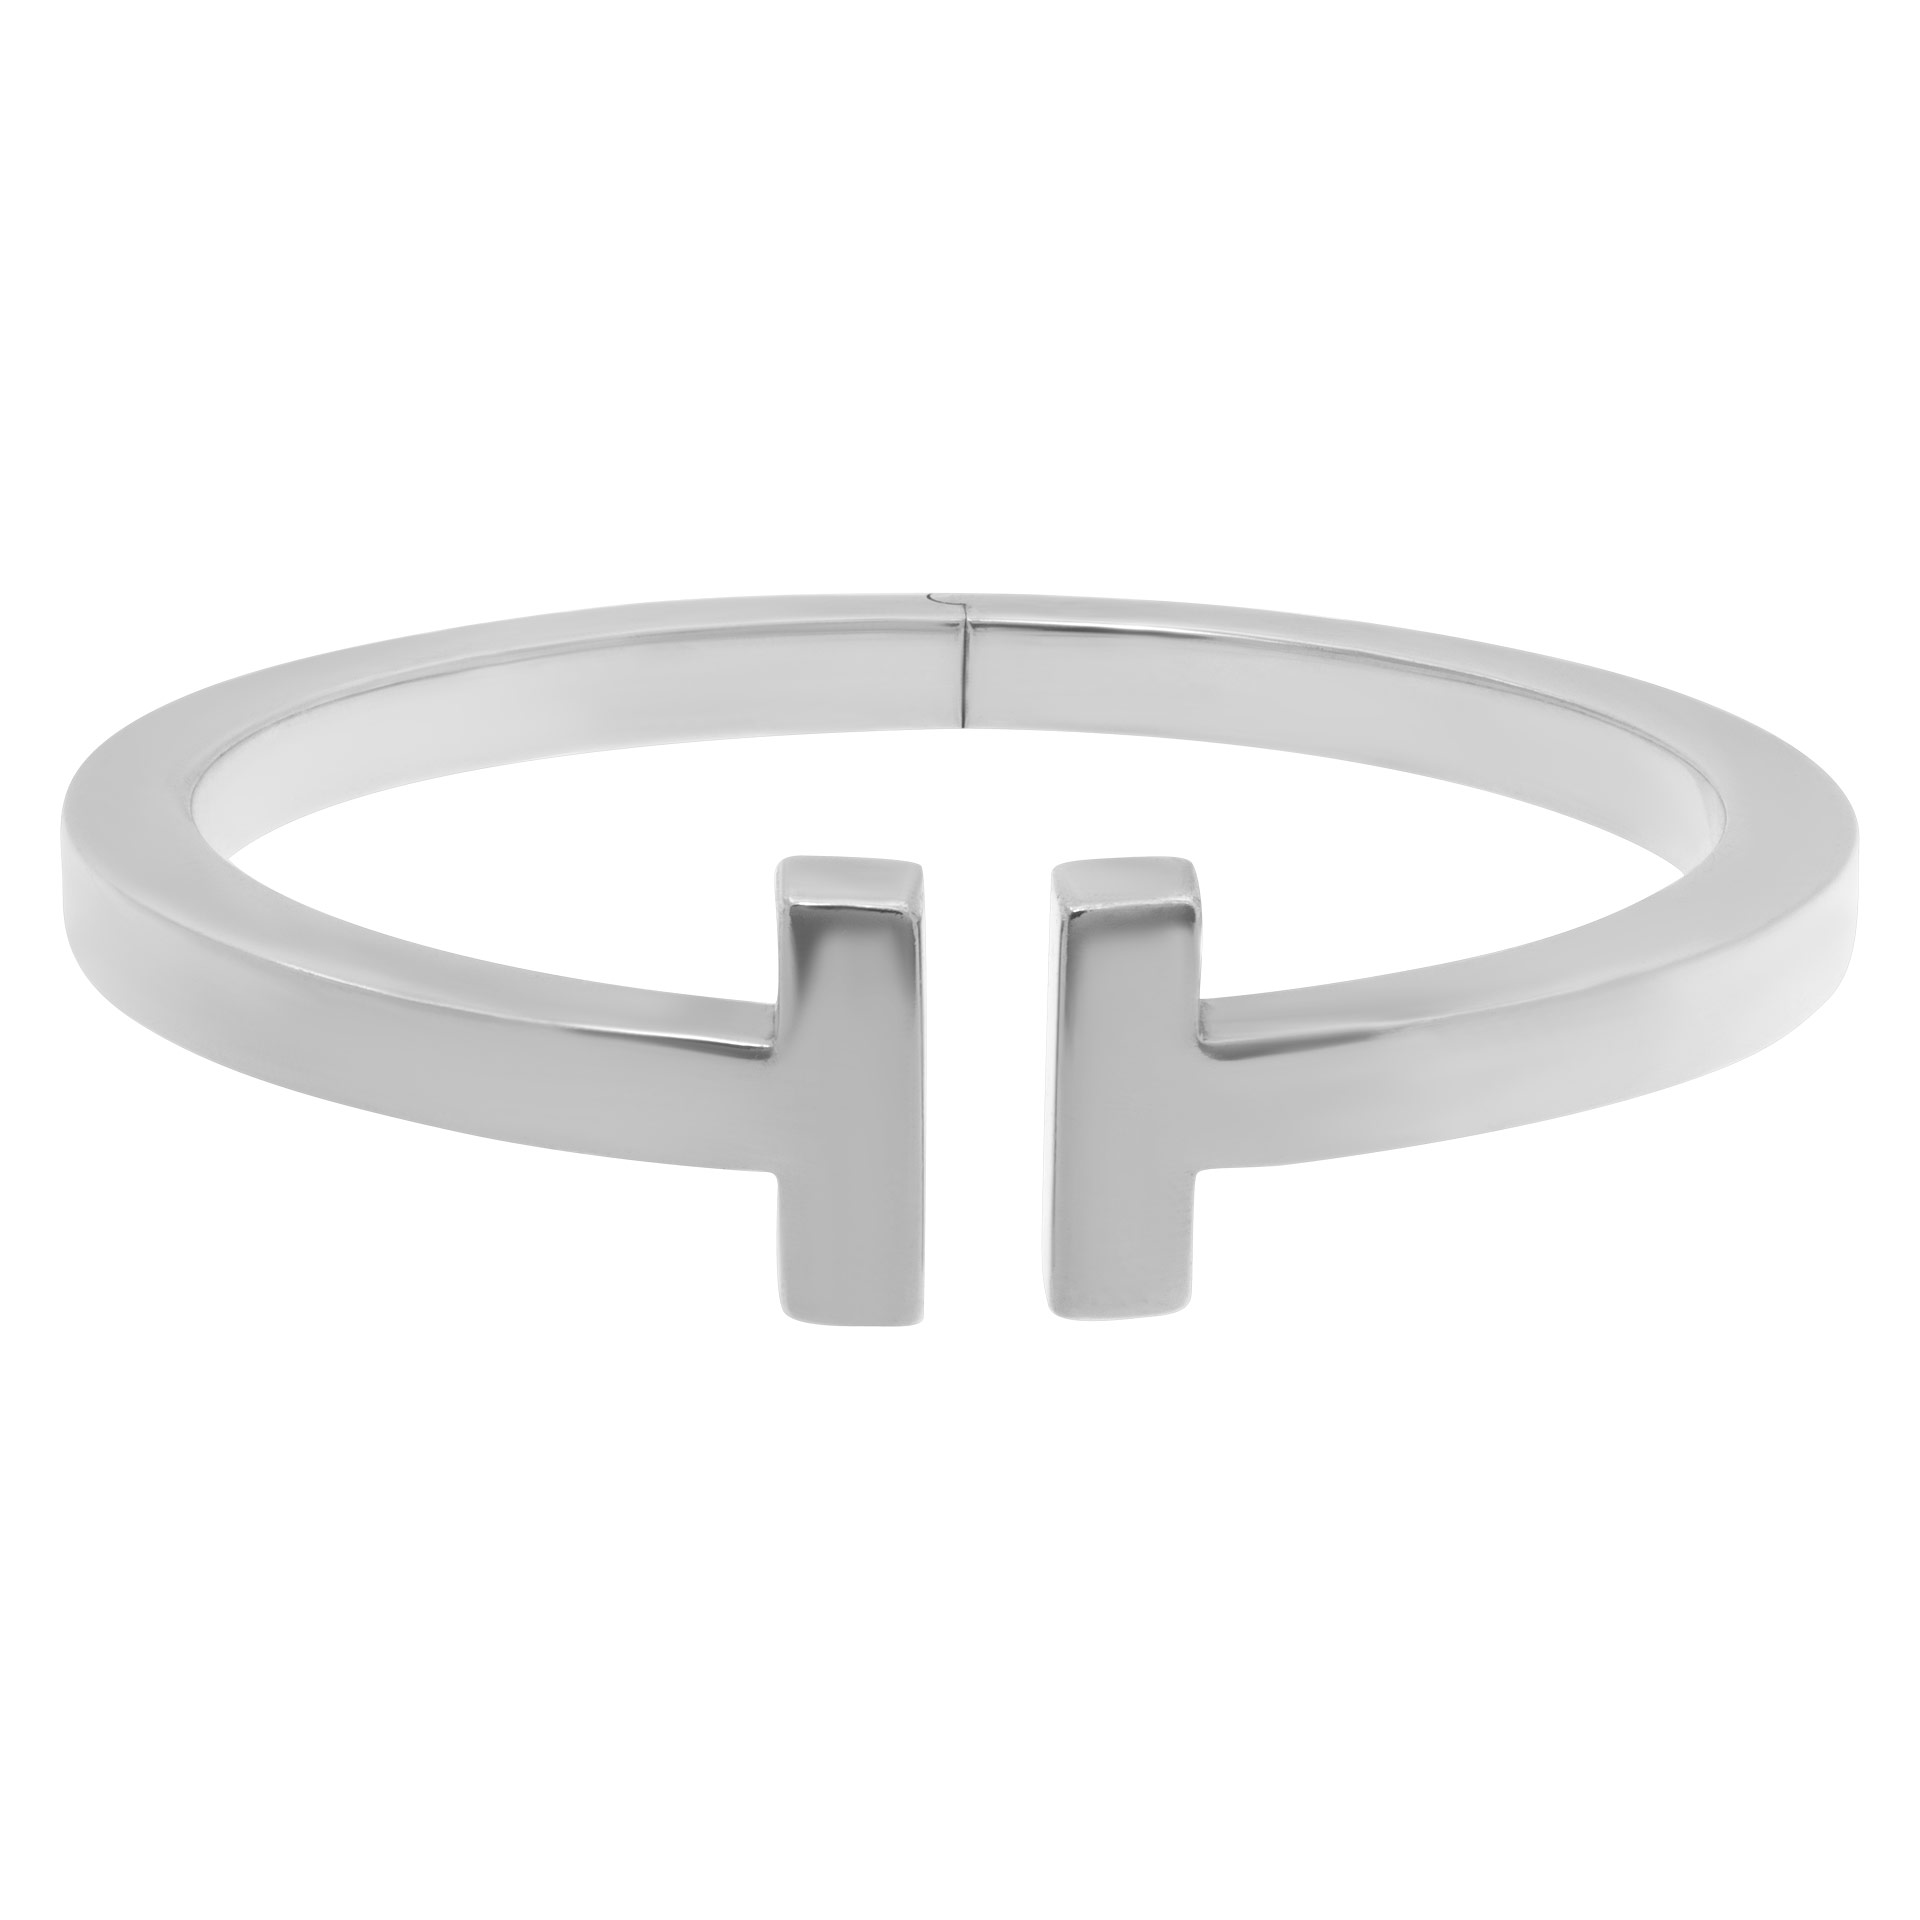 Tiffany and Co. Tsquare bracelet in sterling silver image 1